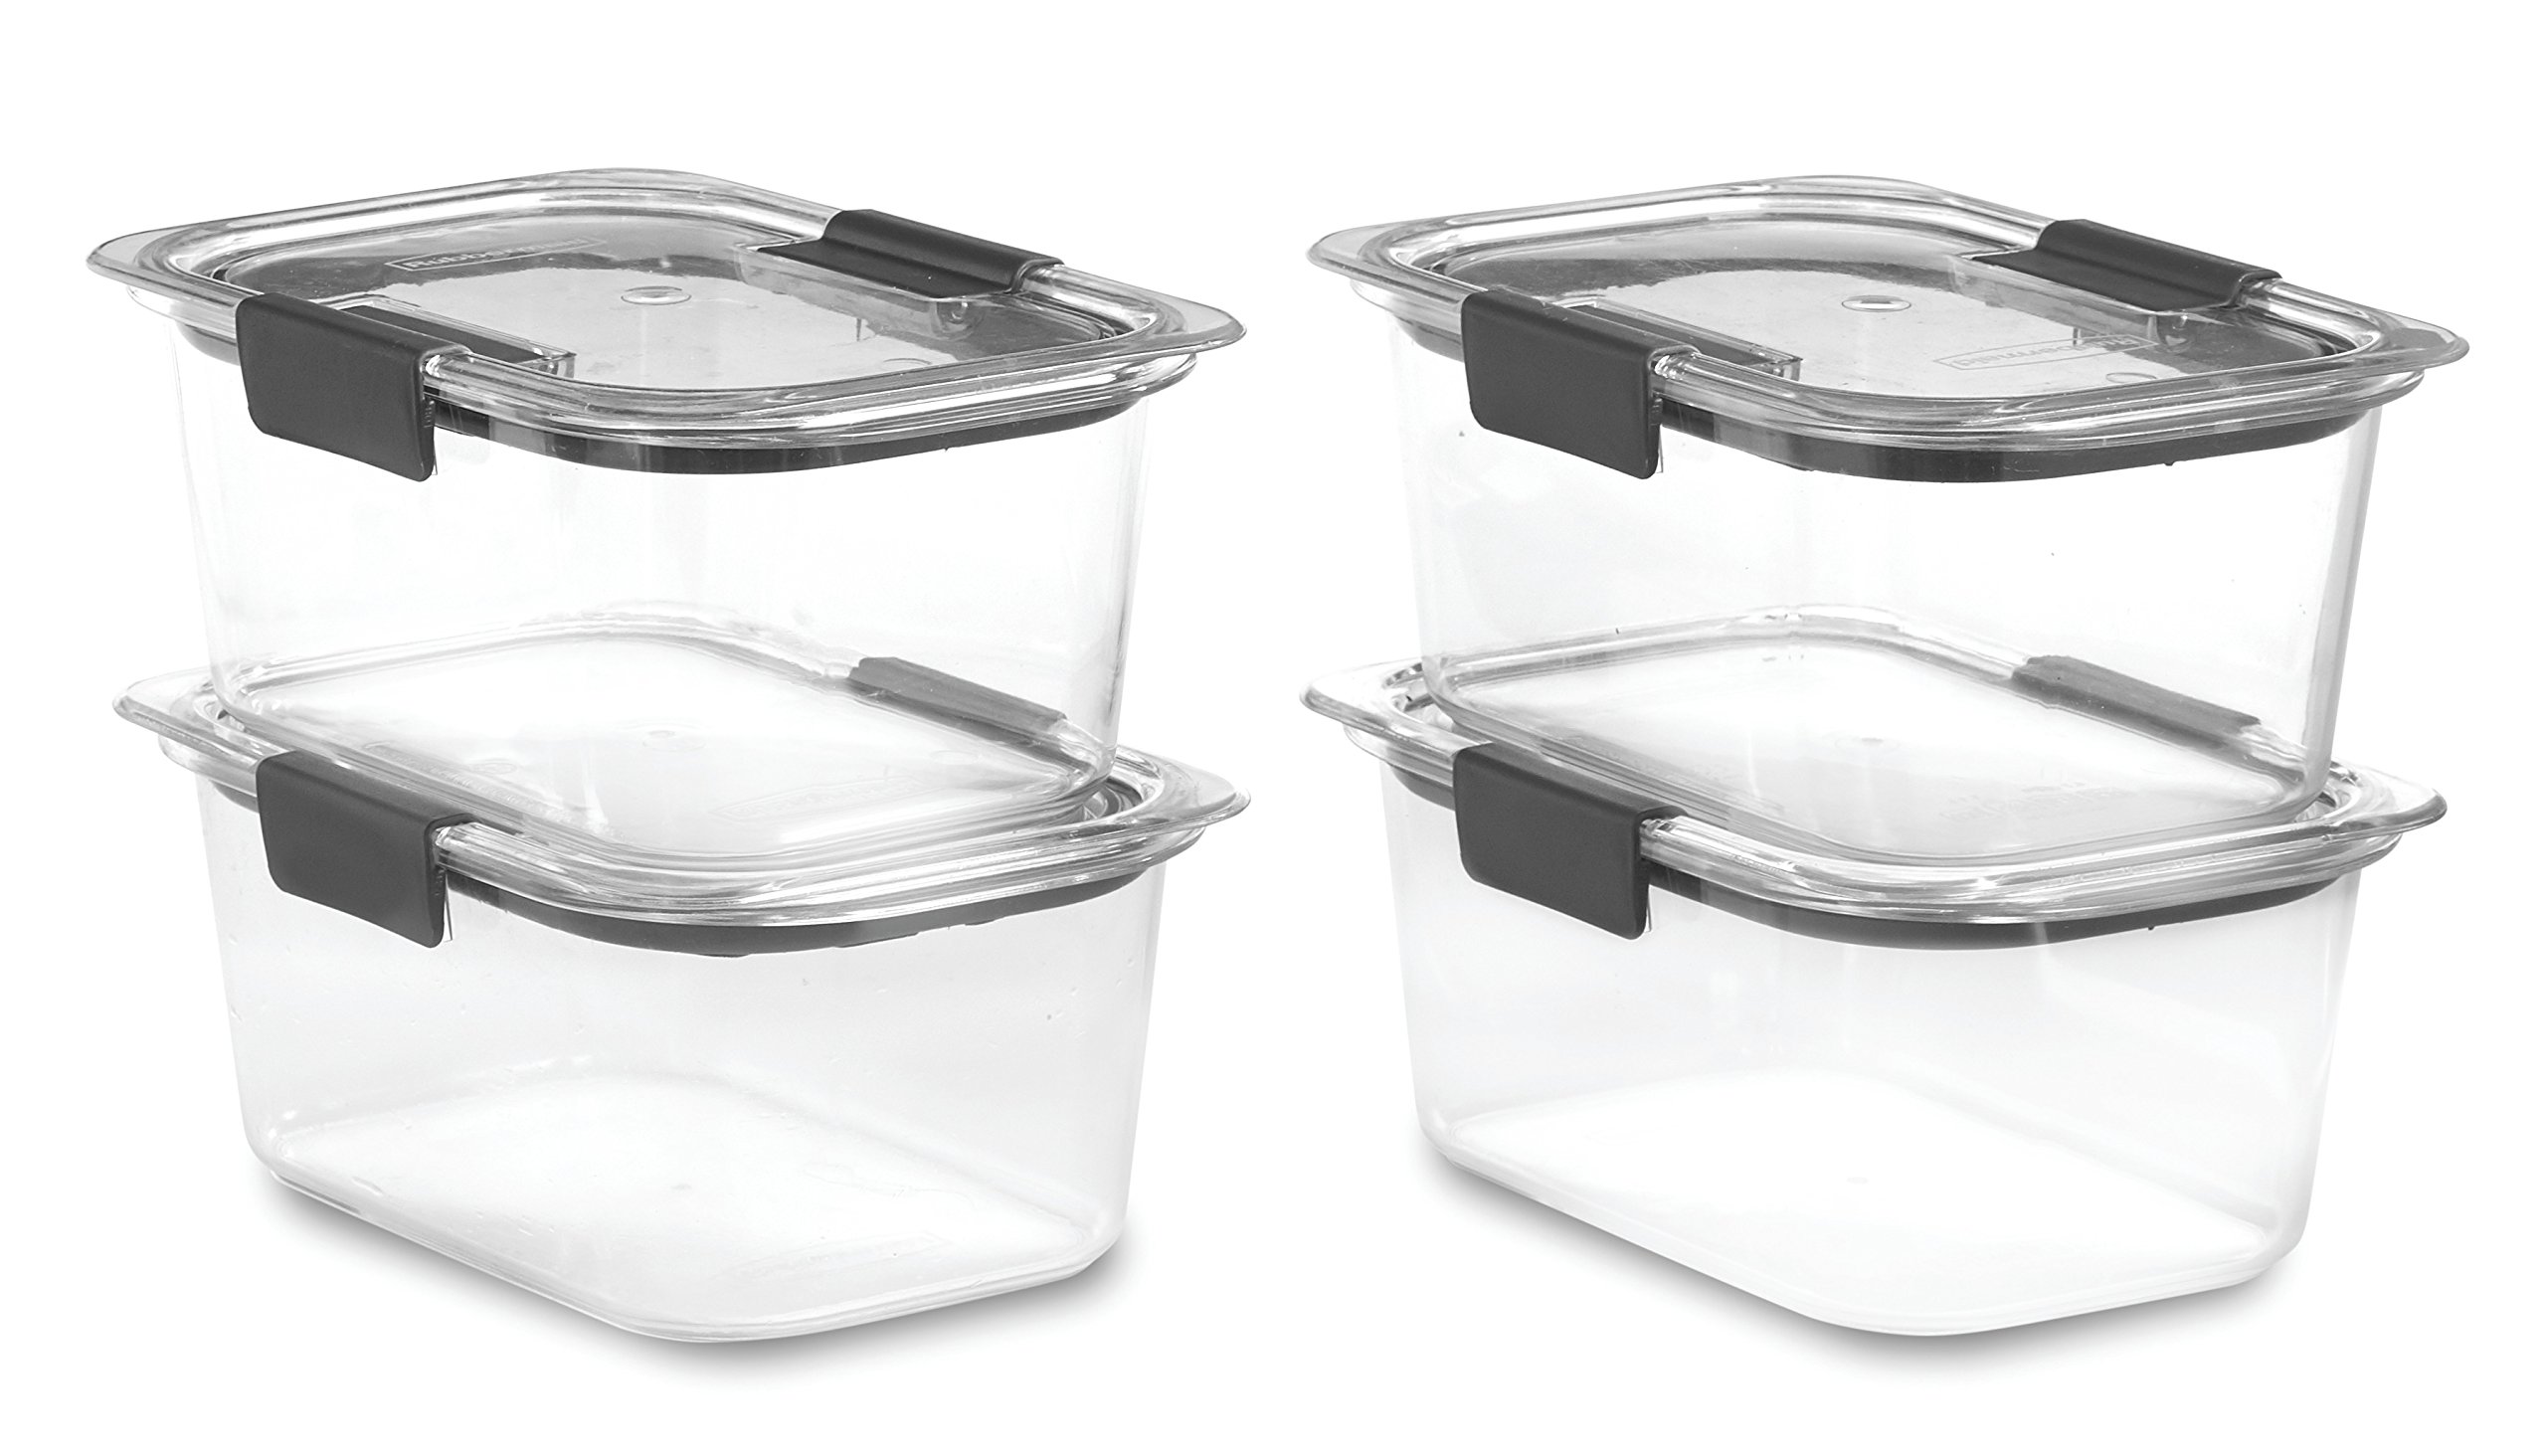 Rubbermaid Brilliance BPA Free Food Storage Containers Pack of 4 - 4.7 cups capacity $17.97